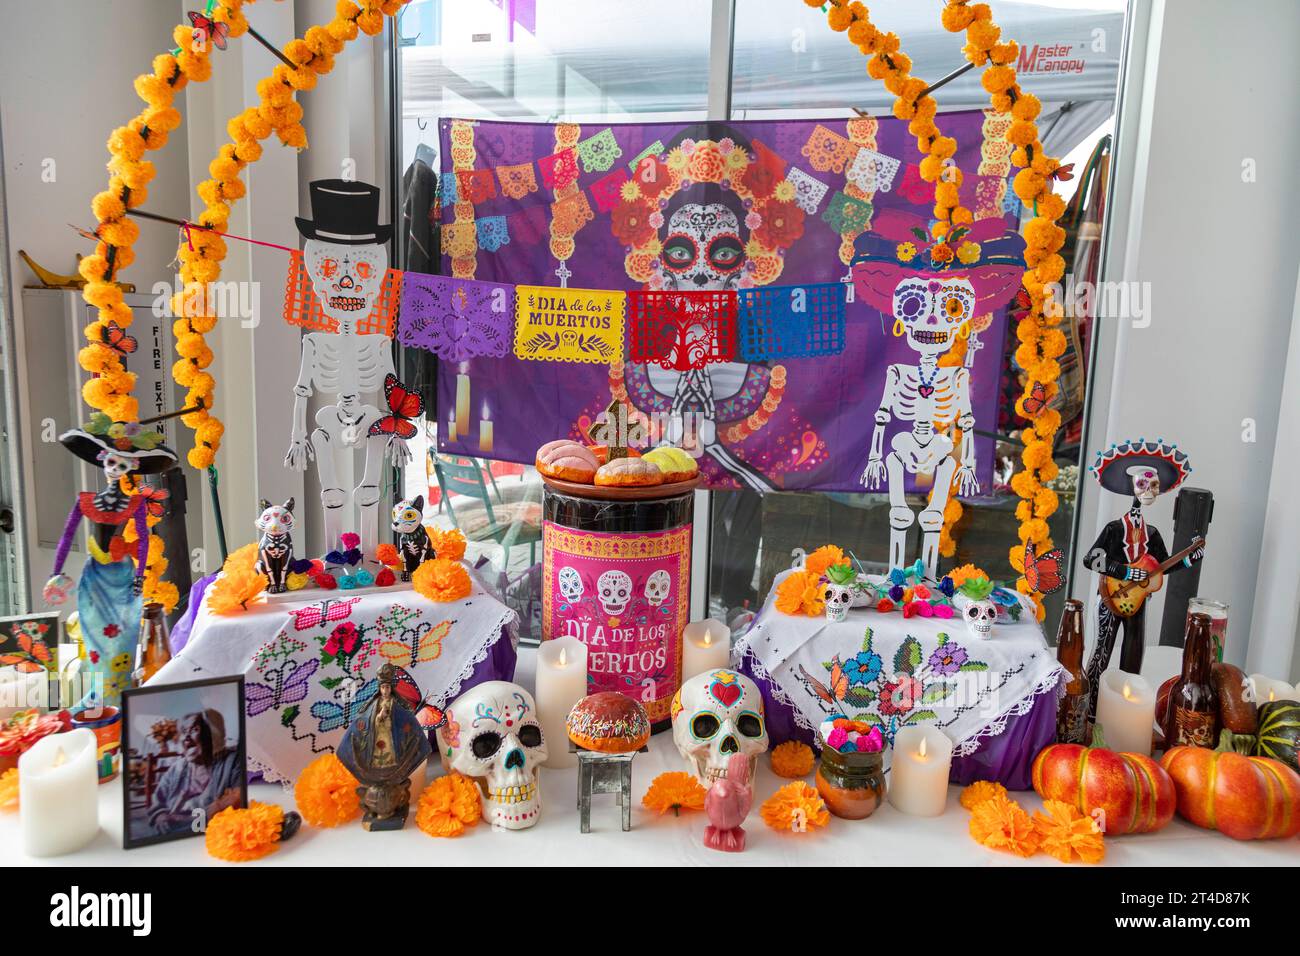 Detroit, Michigan - An ofrenda (altar) honoring the dead at the Day of the Dead celebration at Valade Park on the Detroit Riverfront. Stock Photo